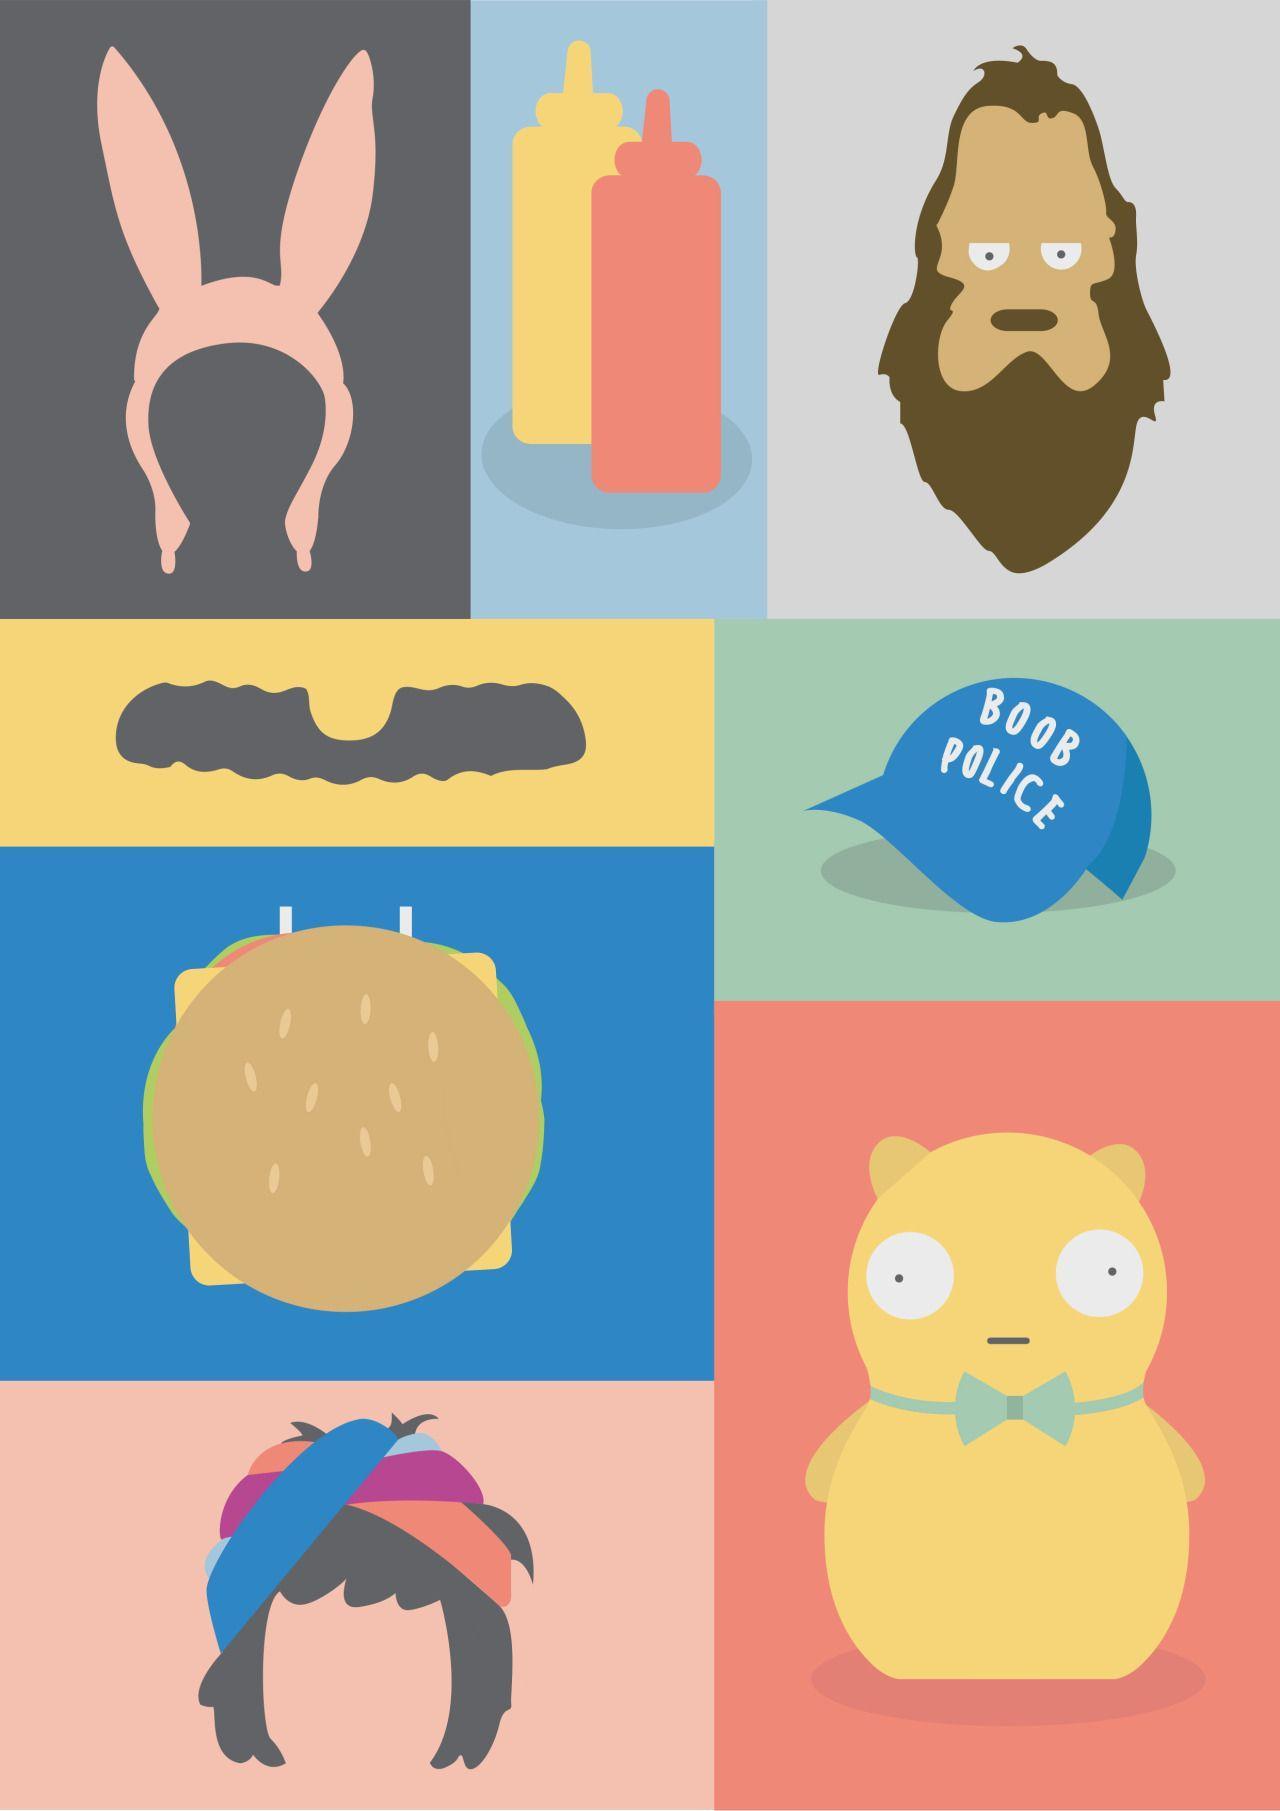 Bobs Burgers iPhone wallpapers  rBobsBurgers